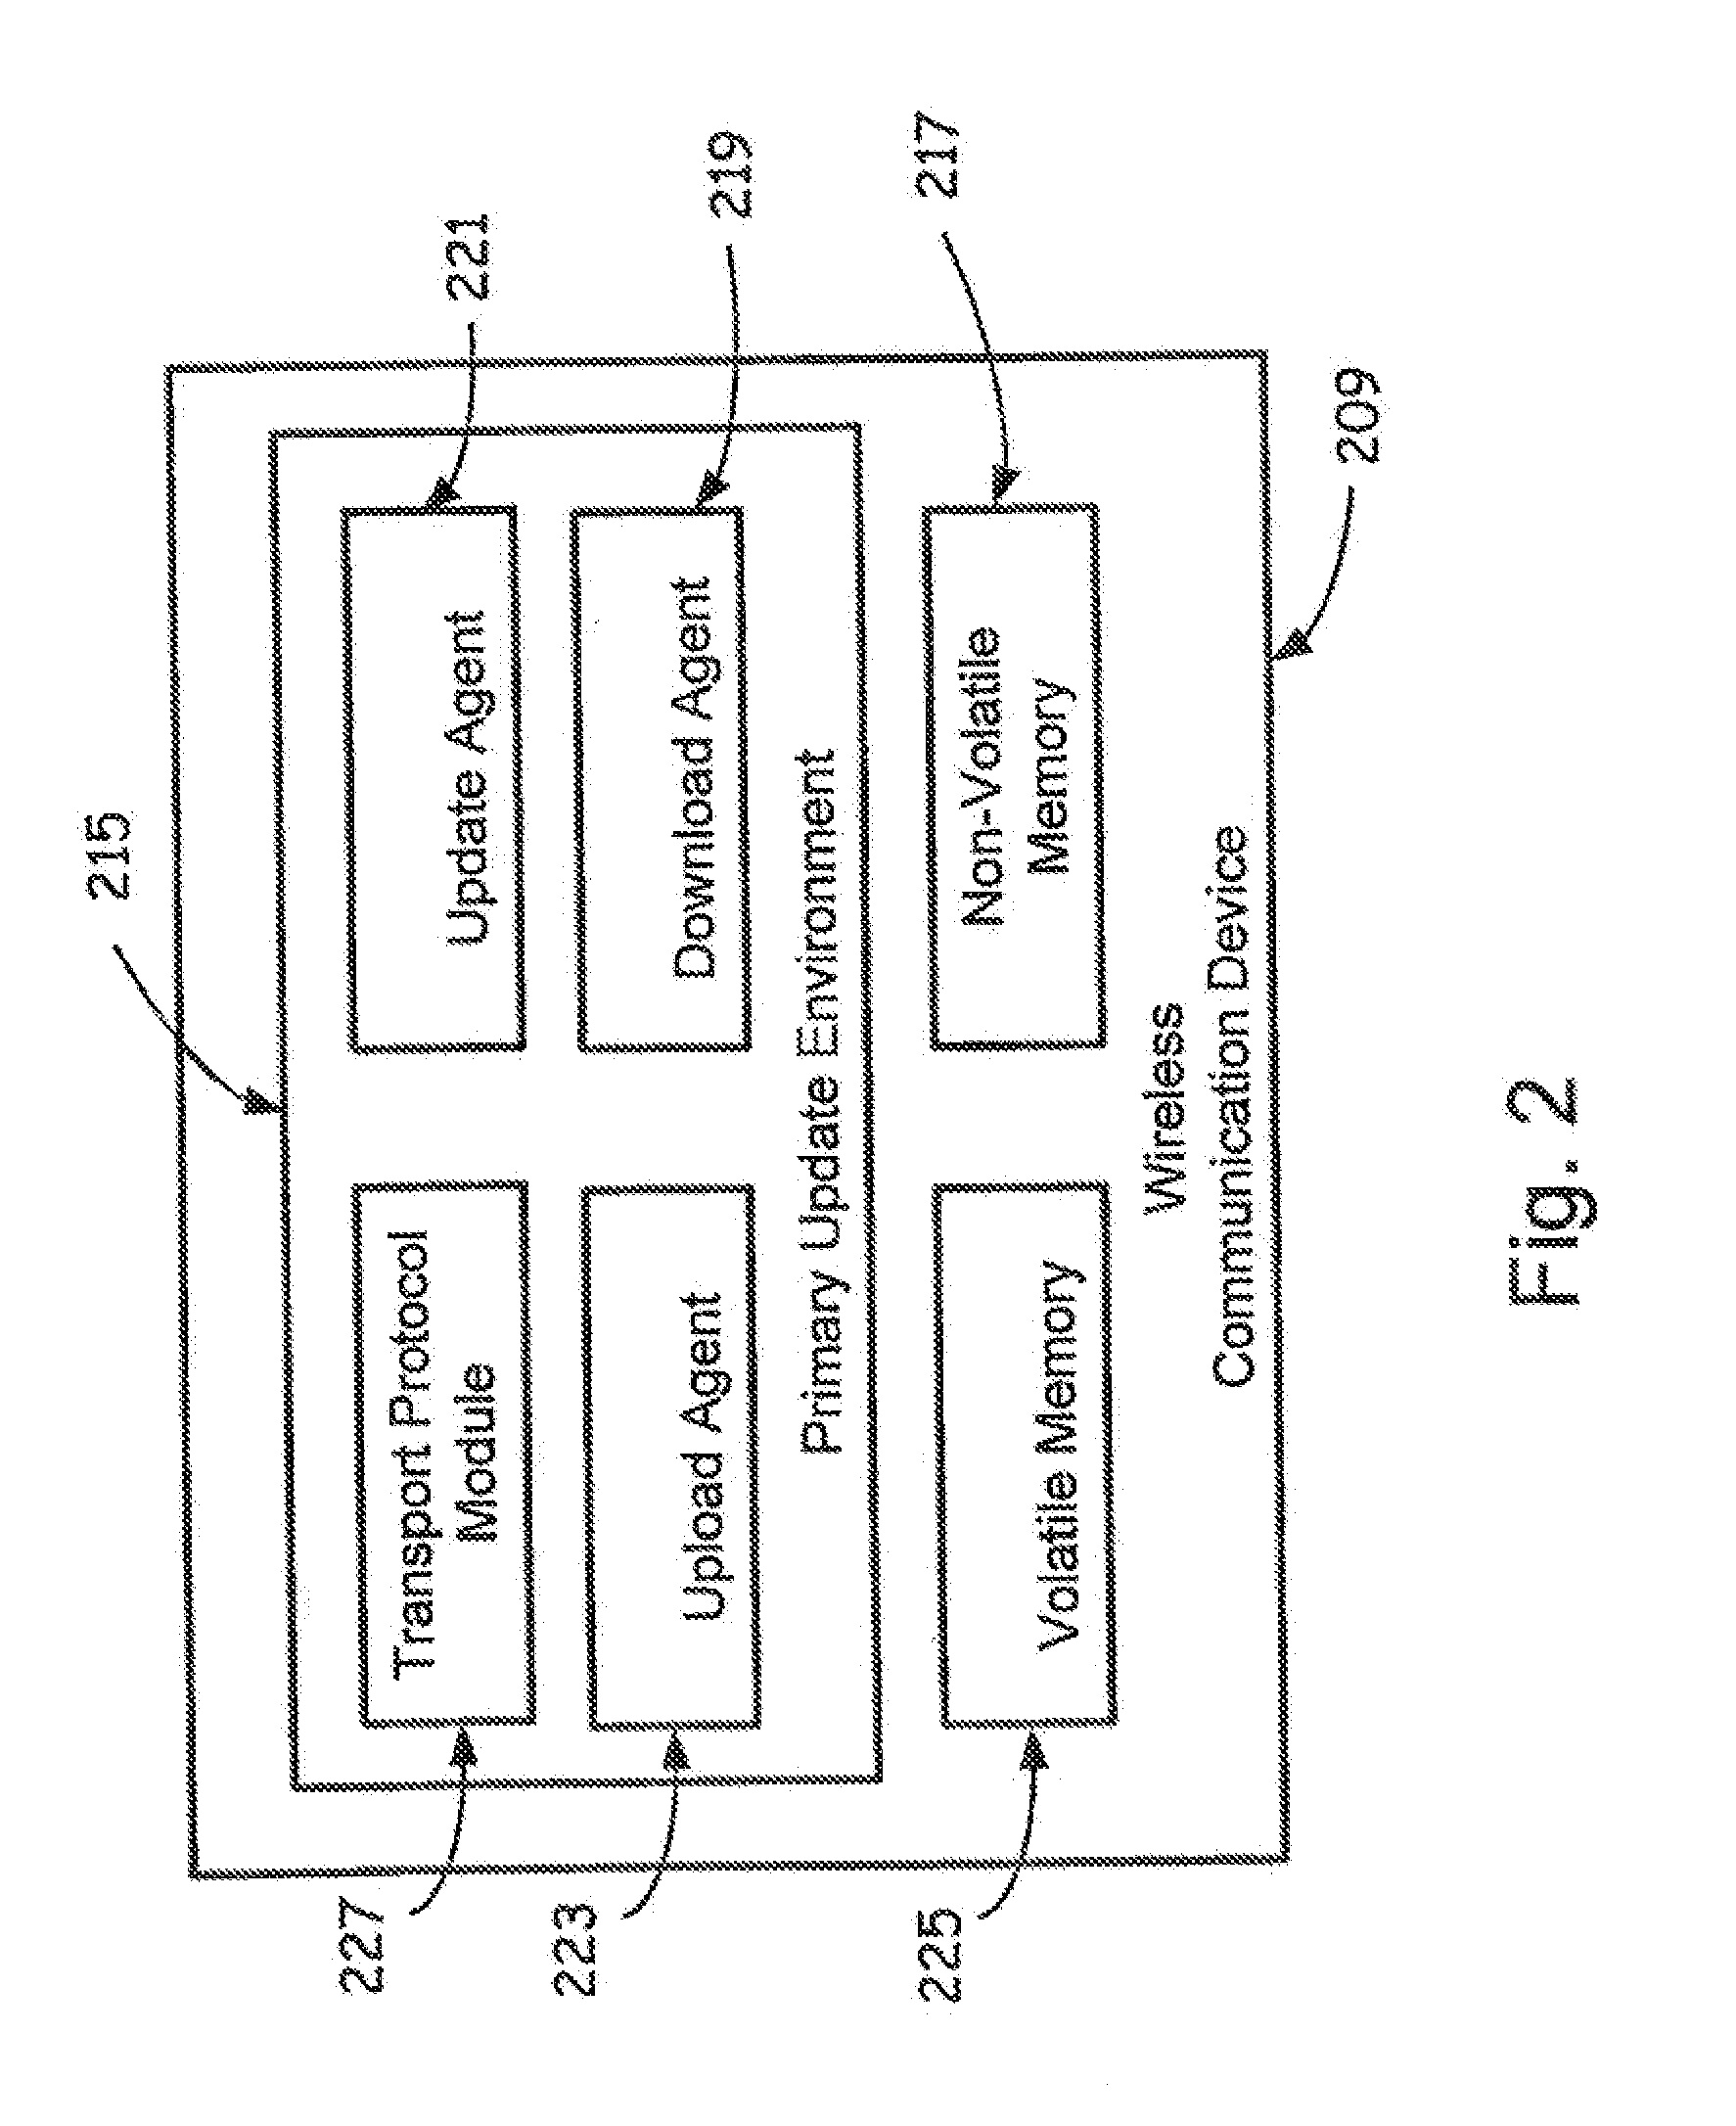 Network for updating firmware and / or software in wireless communication devices